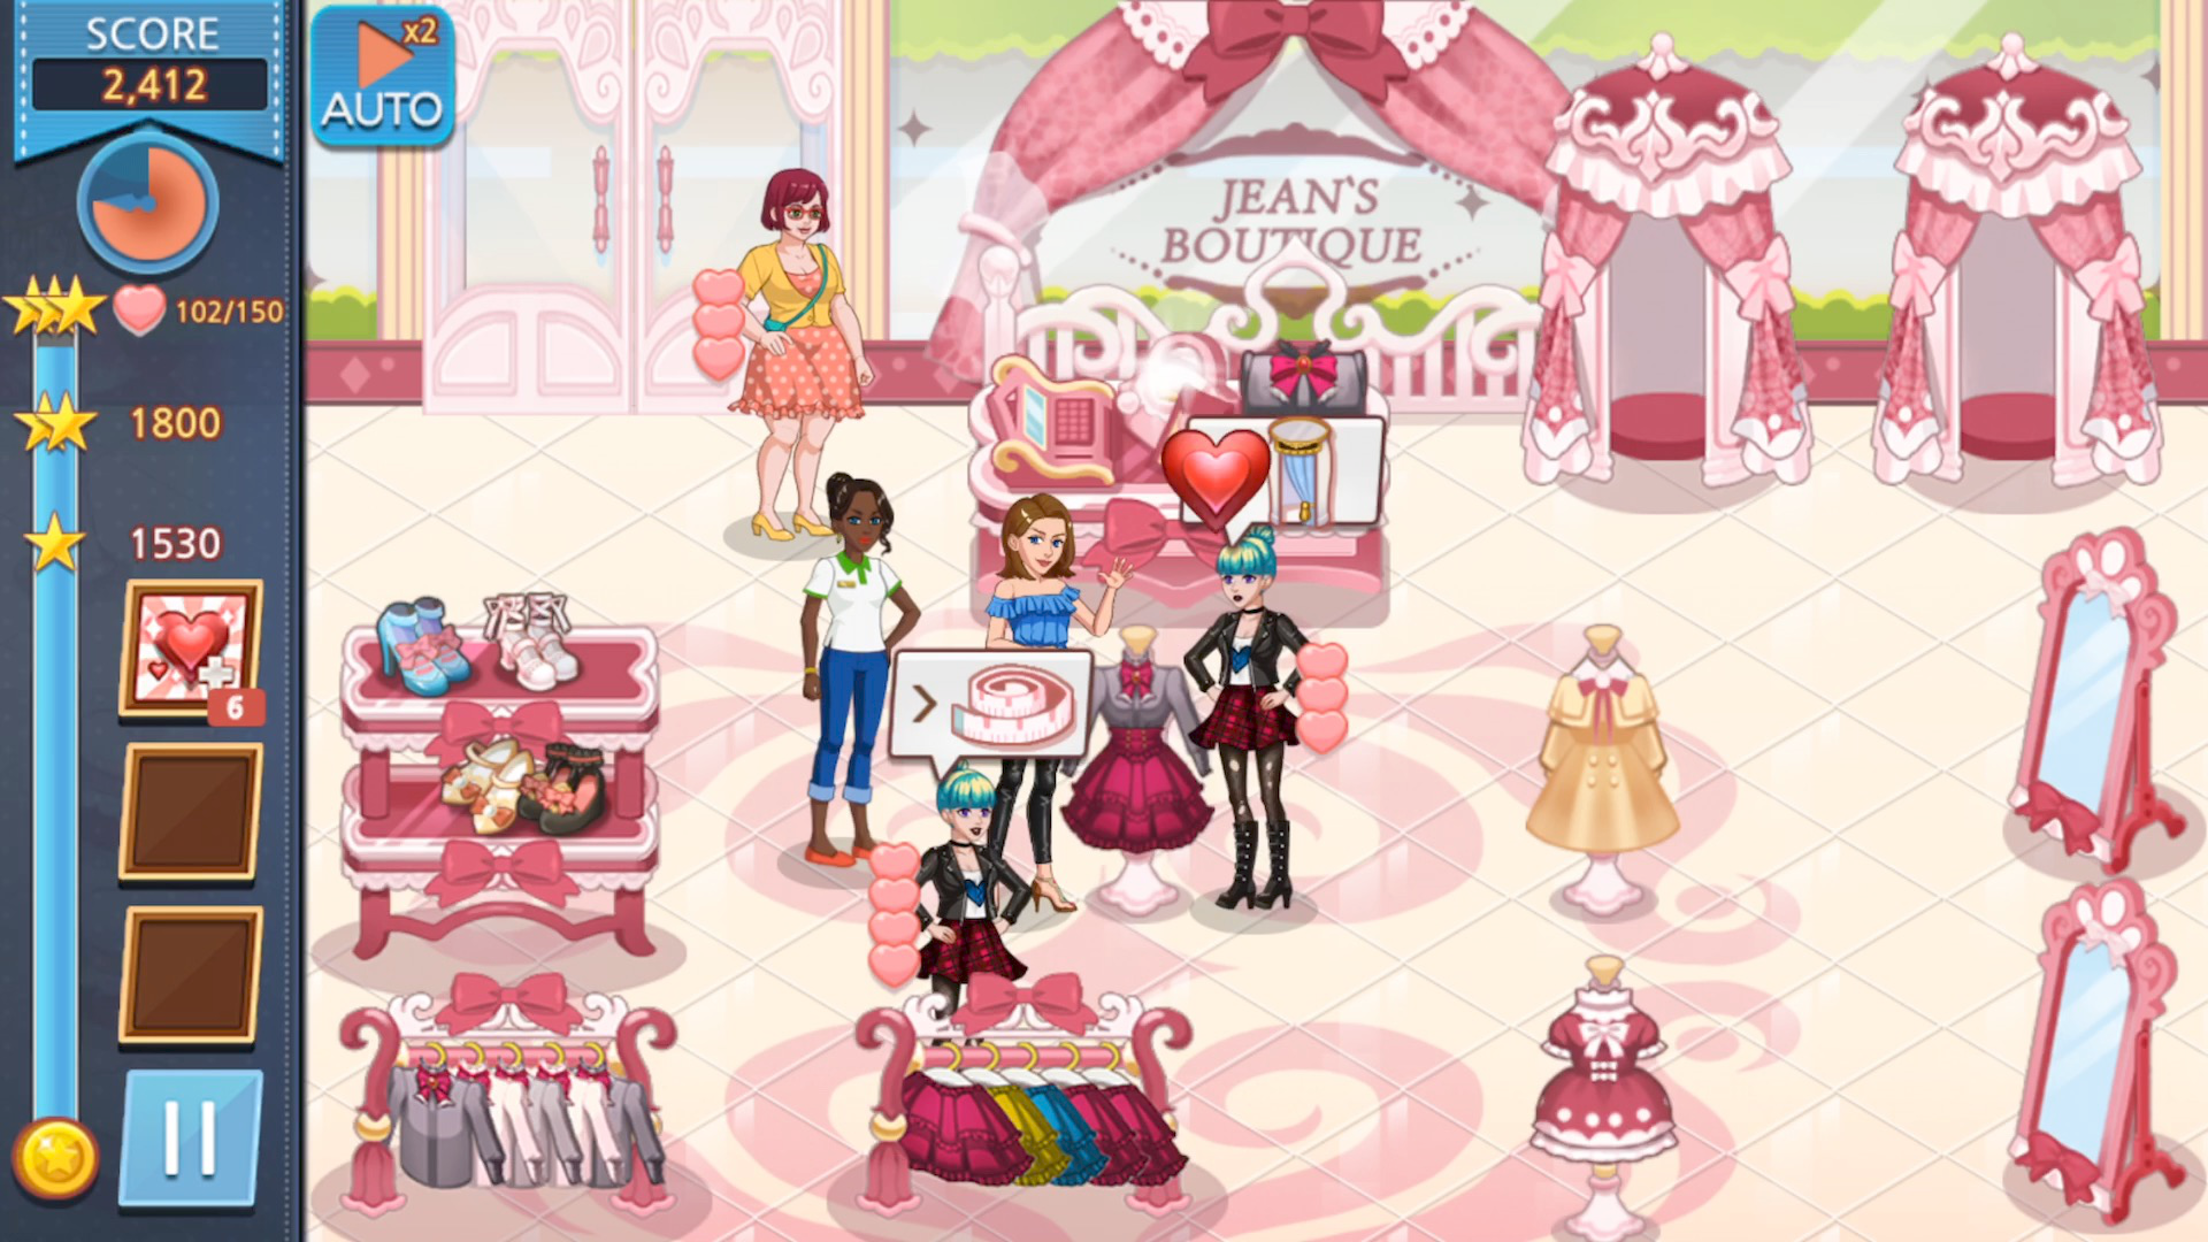 Screenshot 1 of Jeans Boutique ၃ 1.0.41